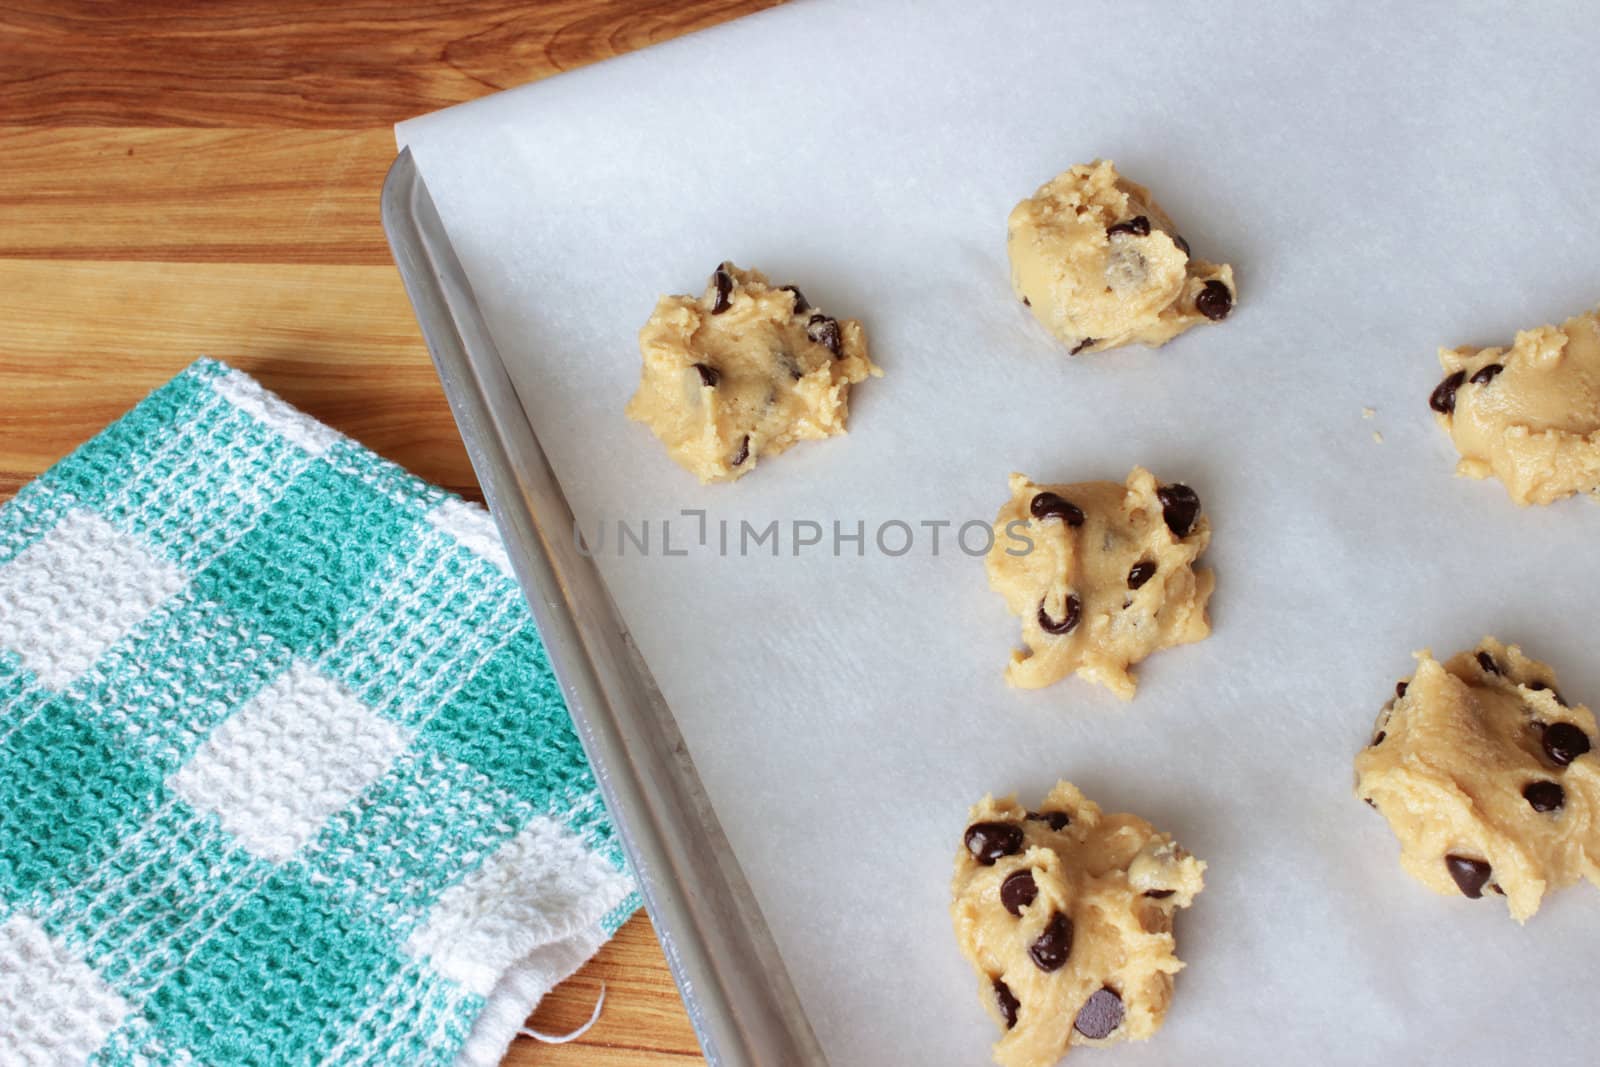 A close-up image of a cookie sheet lined with parchment paper, with chocolate chip cookie dough shaped into cookies, on a wooden counter with a green and white dish towel.